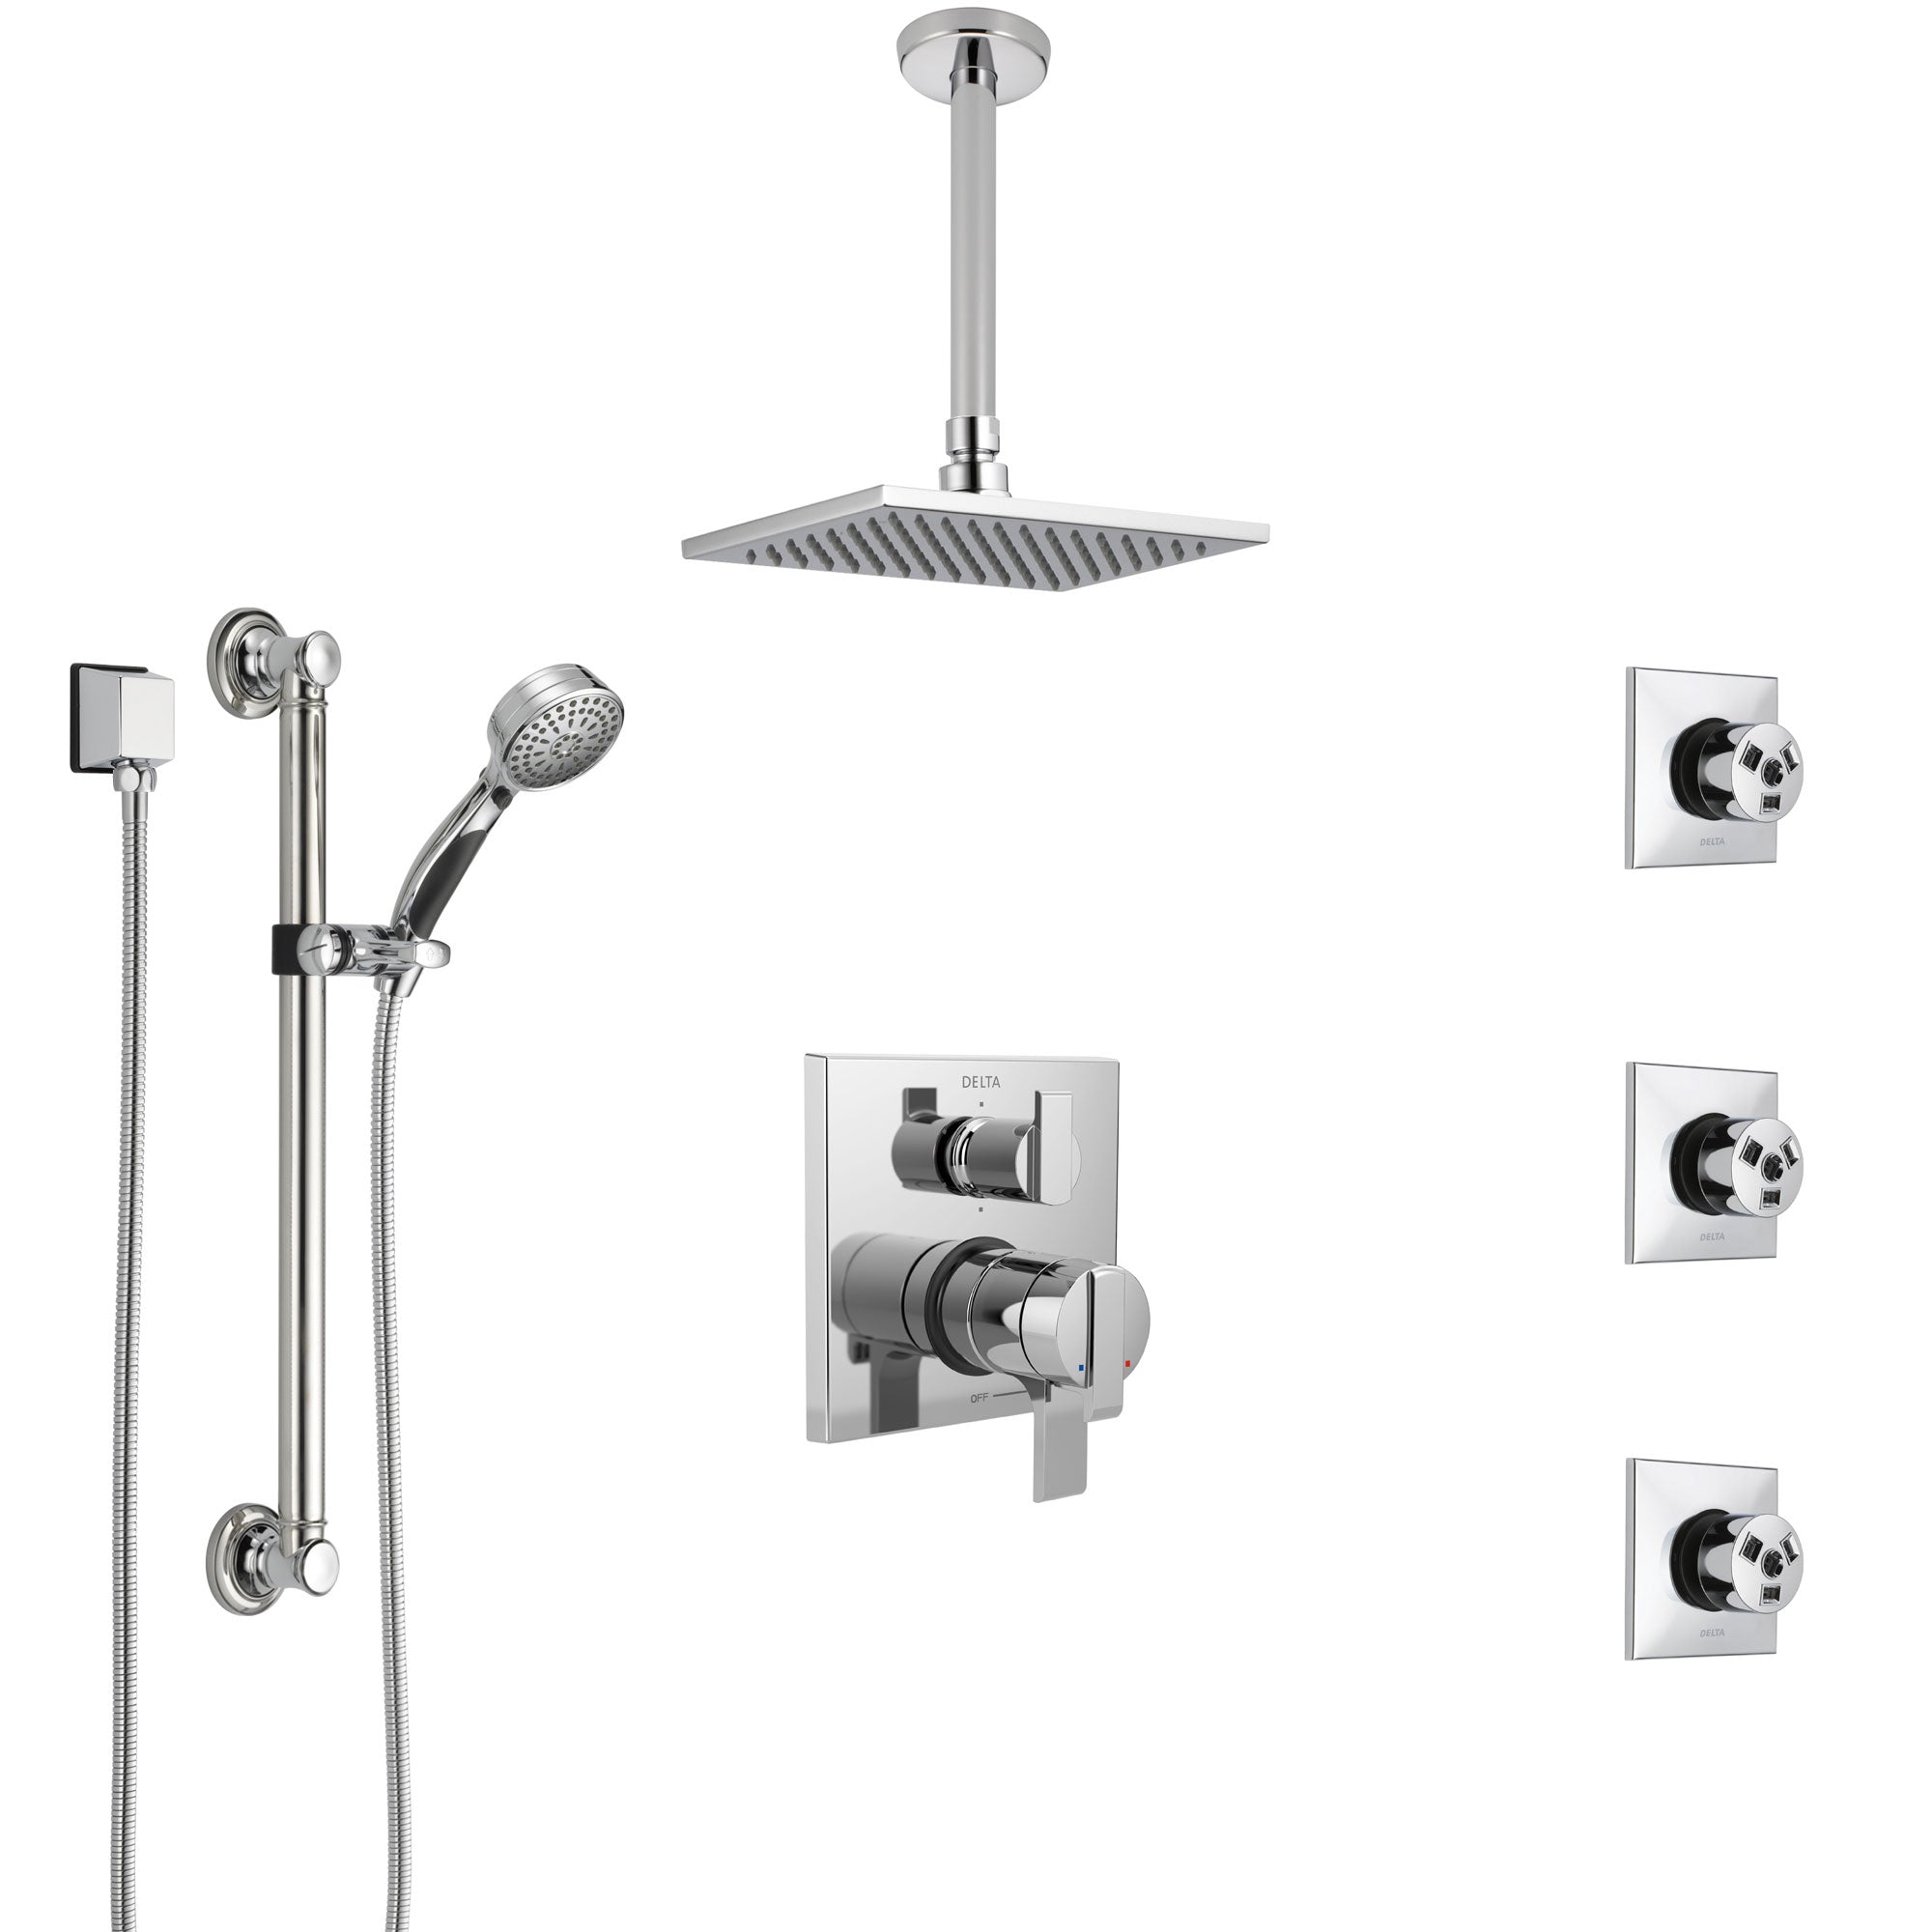 Delta Ara Chrome Shower System with Dual Control Handle, Integrated Diverter, Ceiling Showerhead, 3 Body Sprays, and Grab Bar Hand Shower SS279679